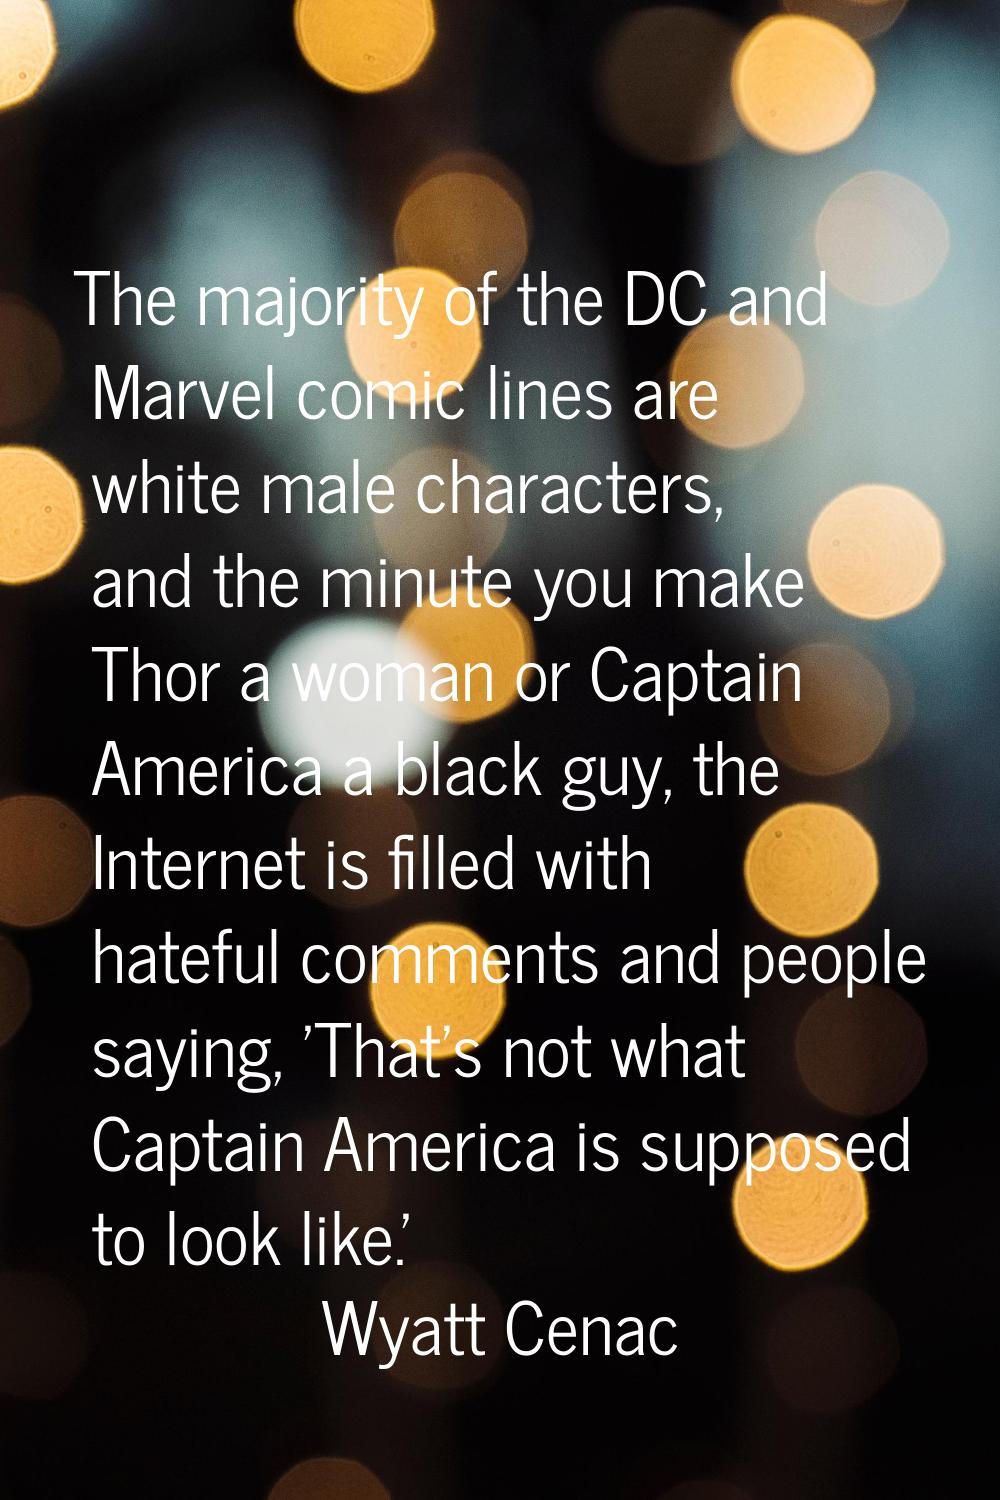 The majority of the DC and Marvel comic lines are white male characters, and the minute you make Th